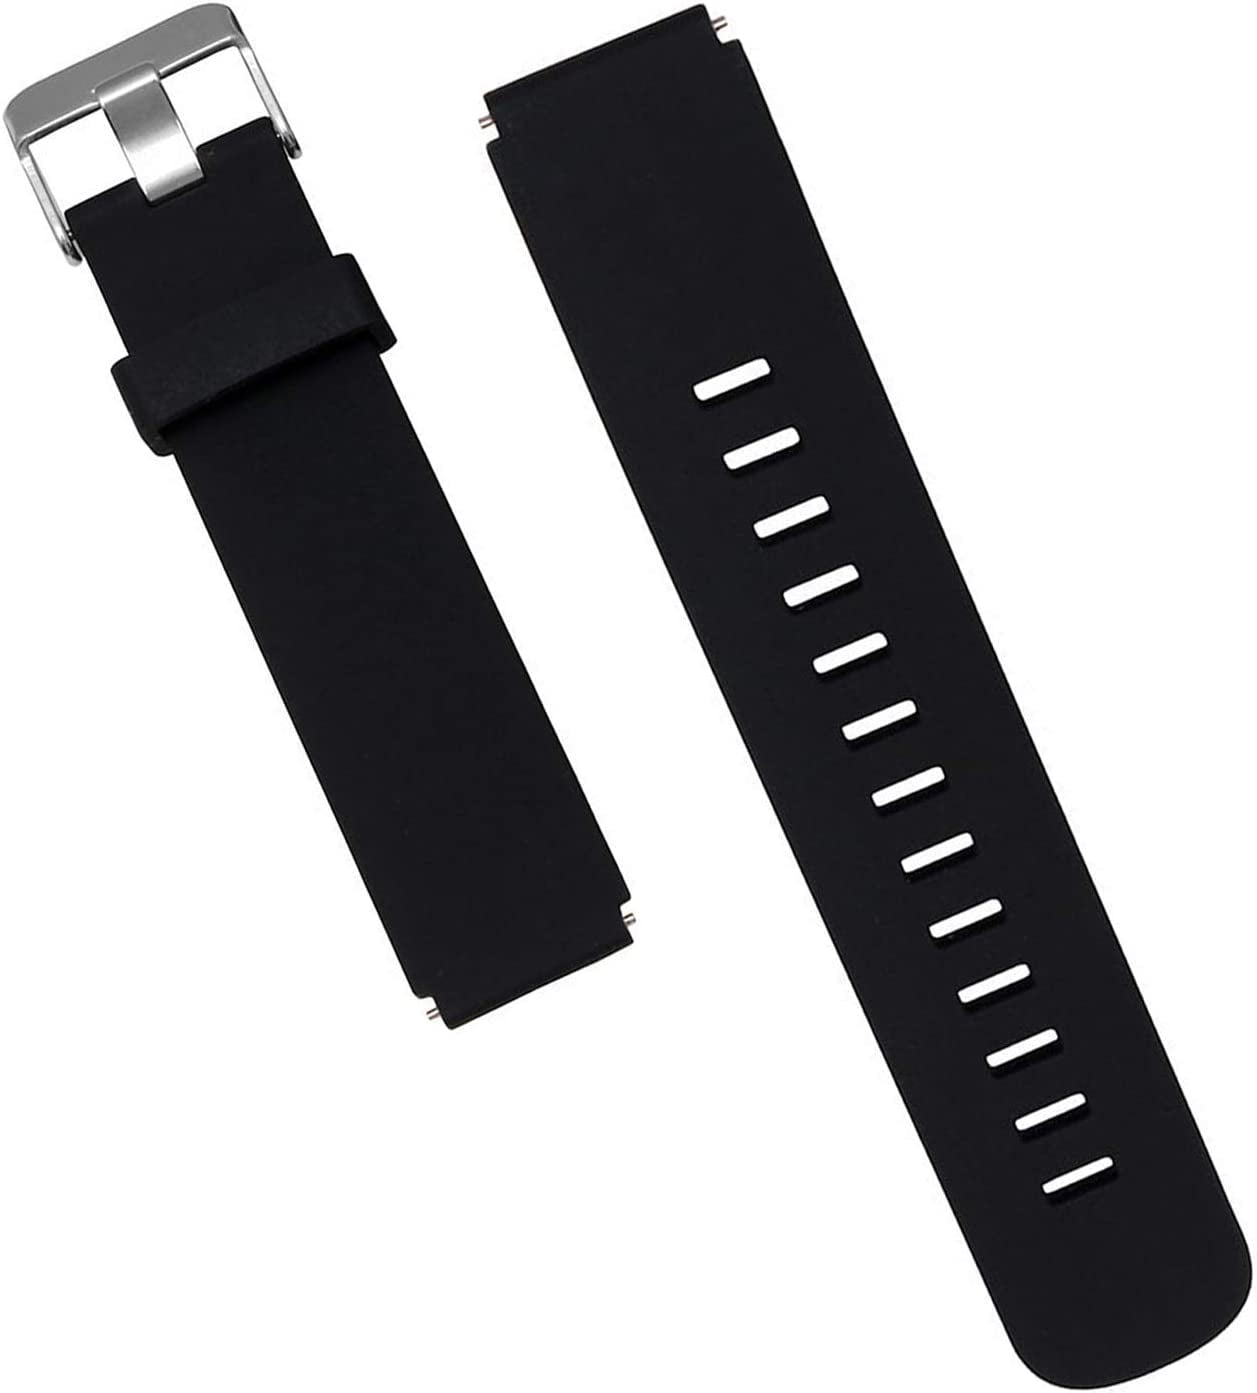 Replacement Smart Watch Bands for Michael Kors Watches  Shoptictoc